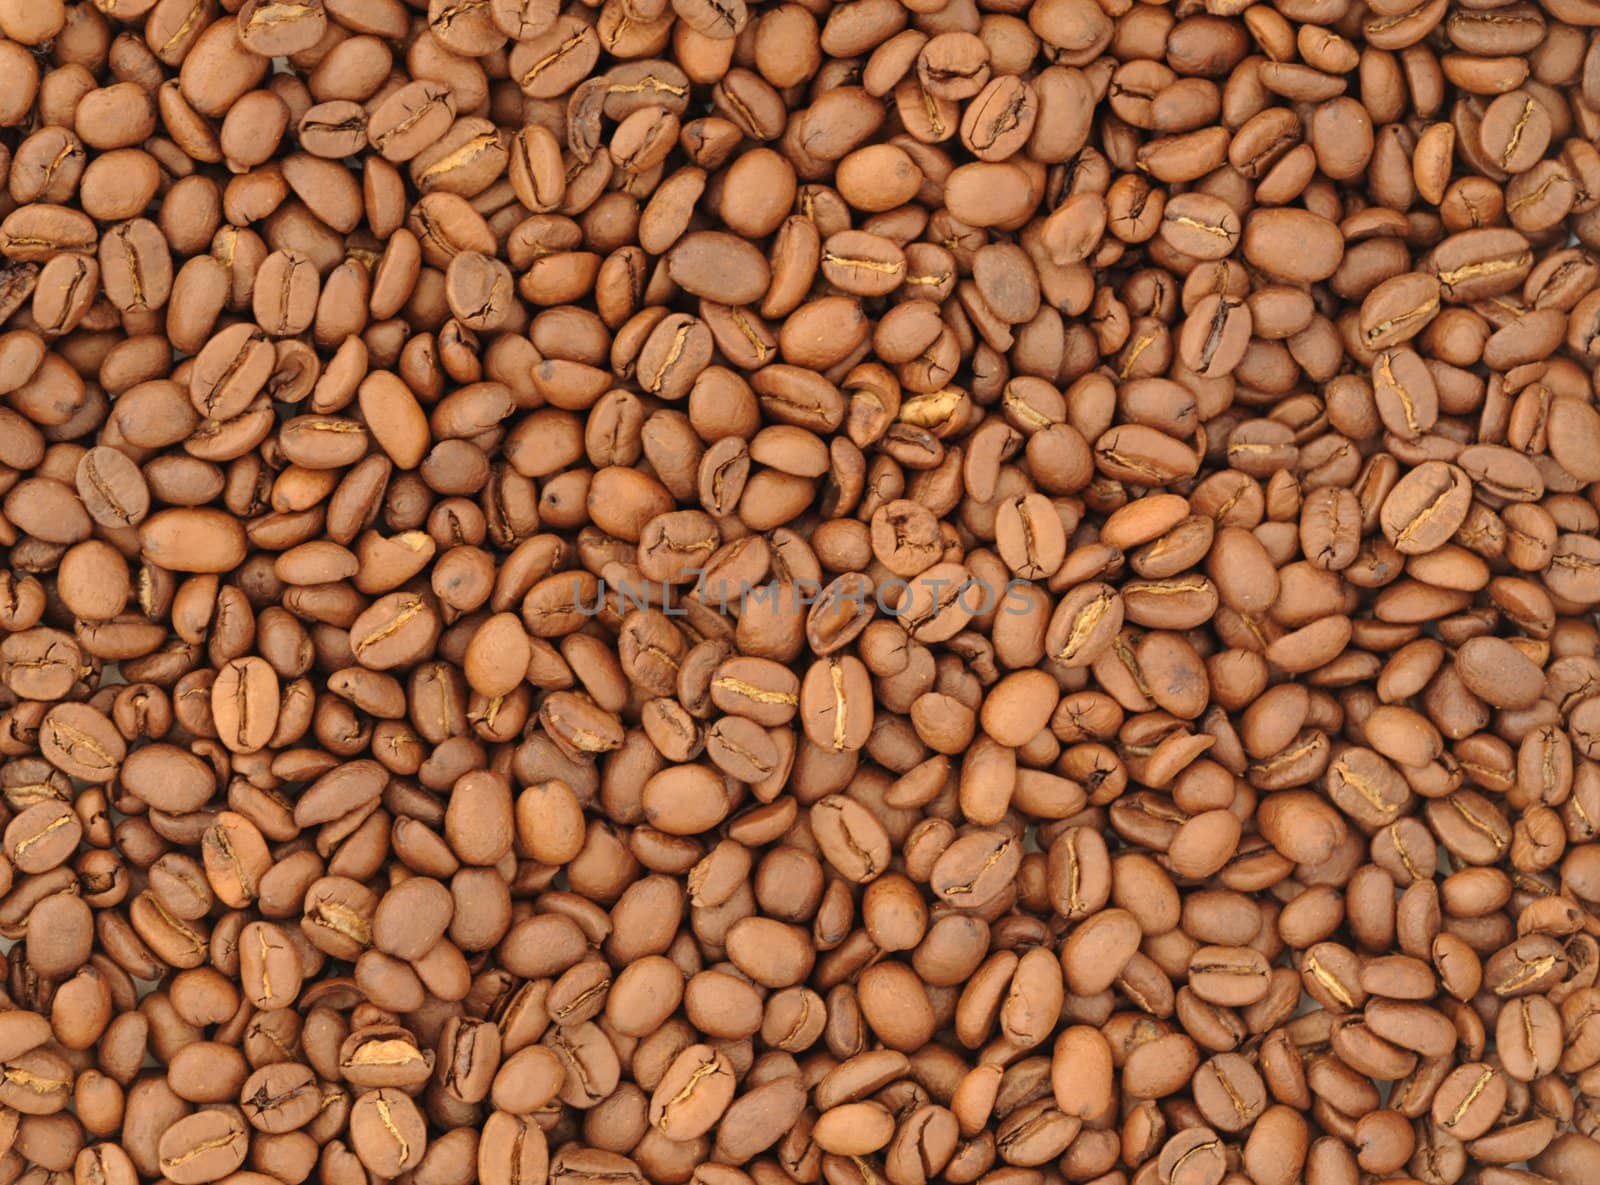 Lots of Natural Roasted Coffee Beans Background.